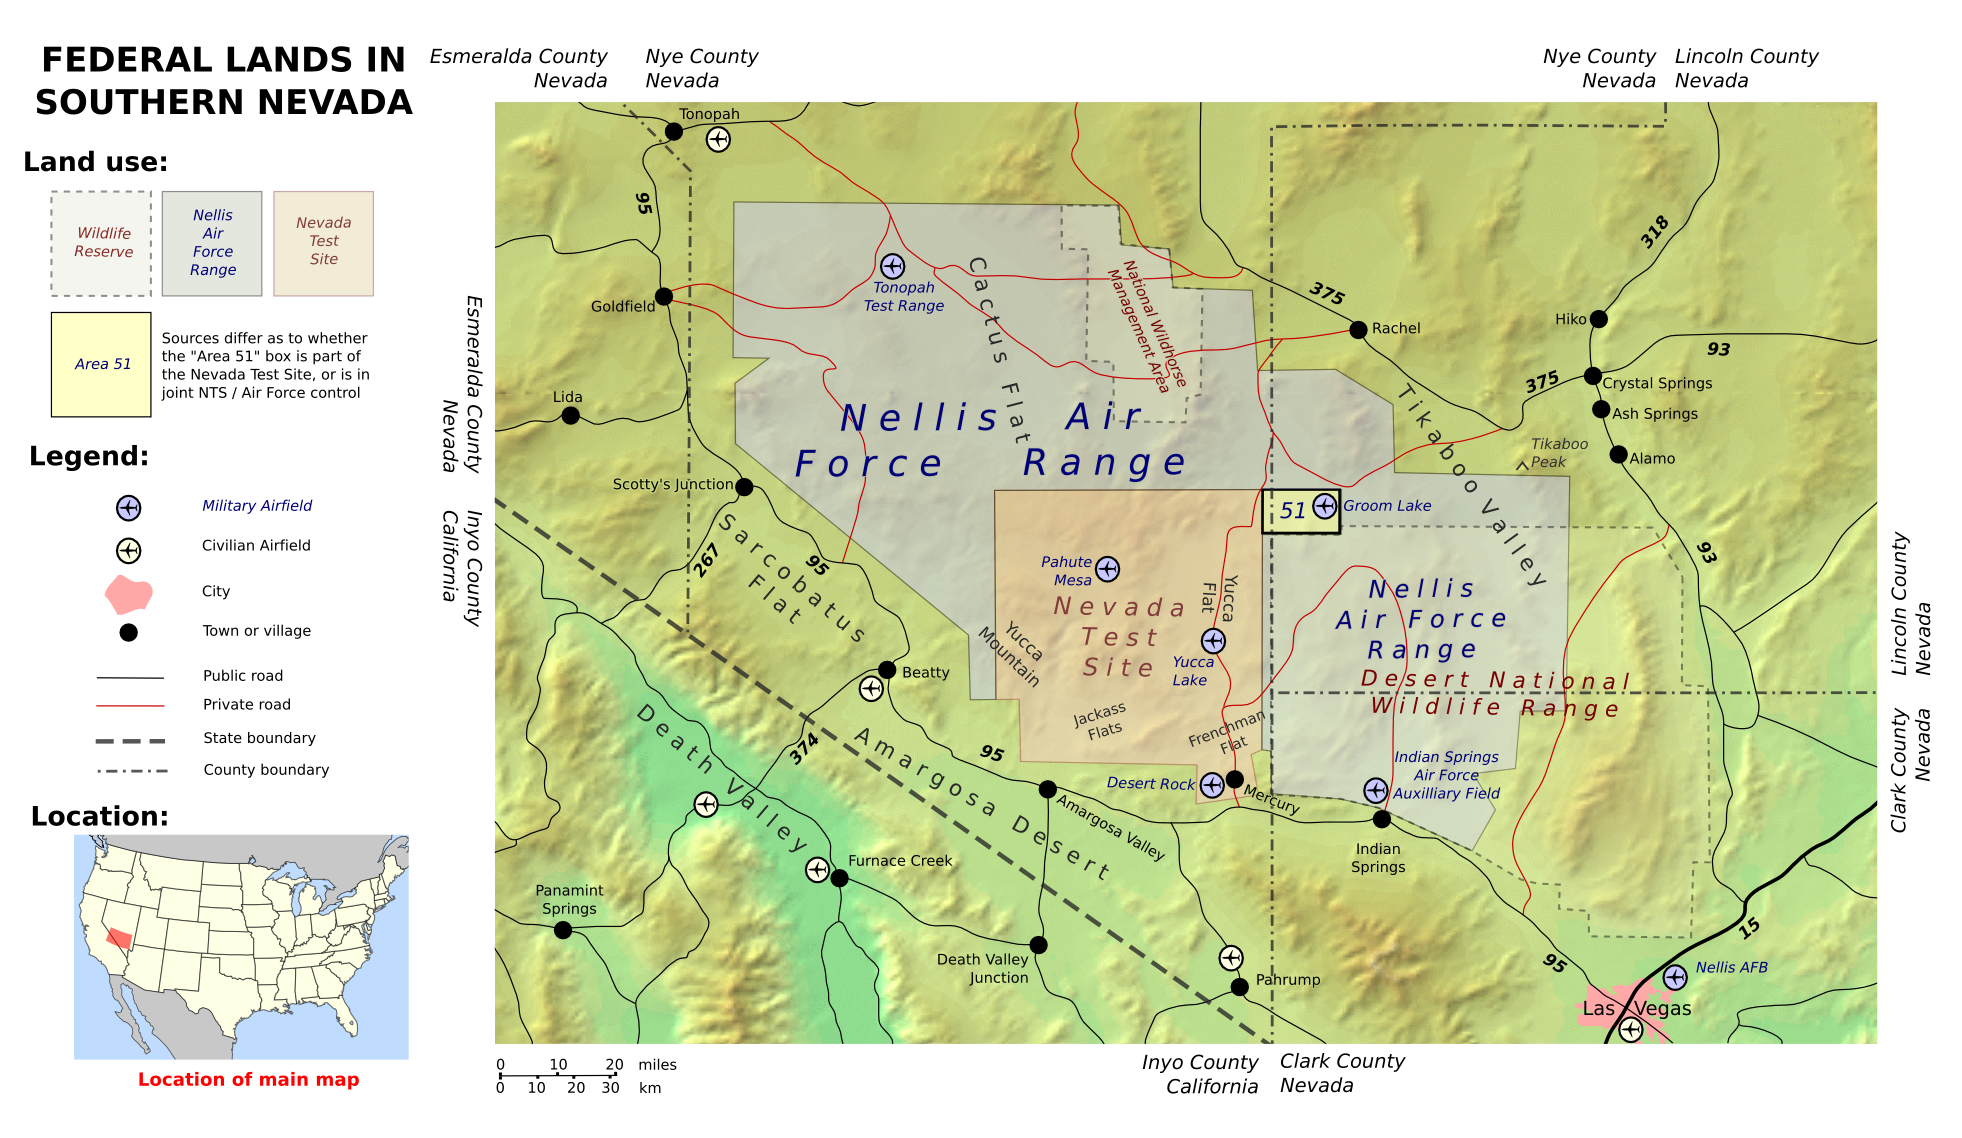 Federal Lands - Location of Area 51